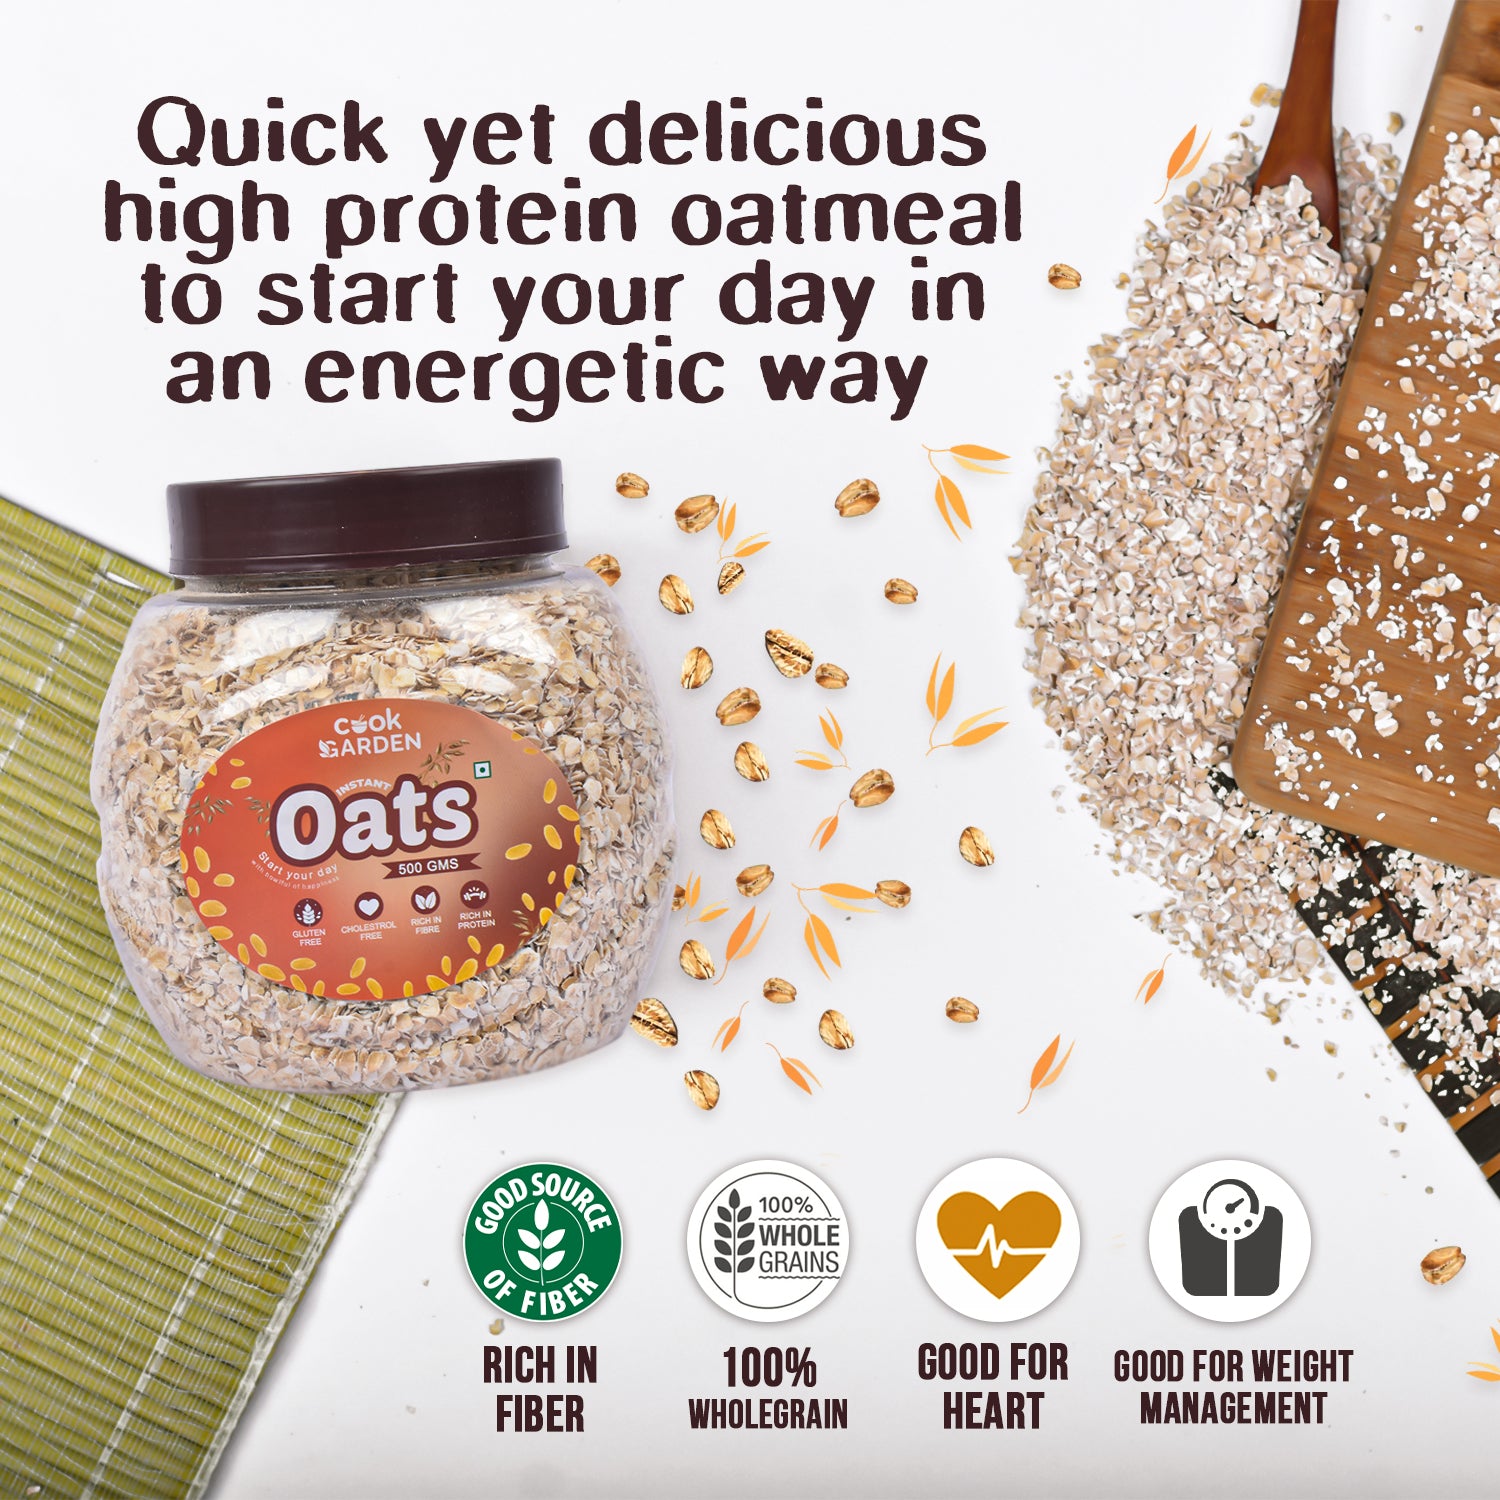 Instant Oats & Oats Pasta Combo, Wholegrain Breakfast, High Protein and Fibre Jar, (500g+300g)